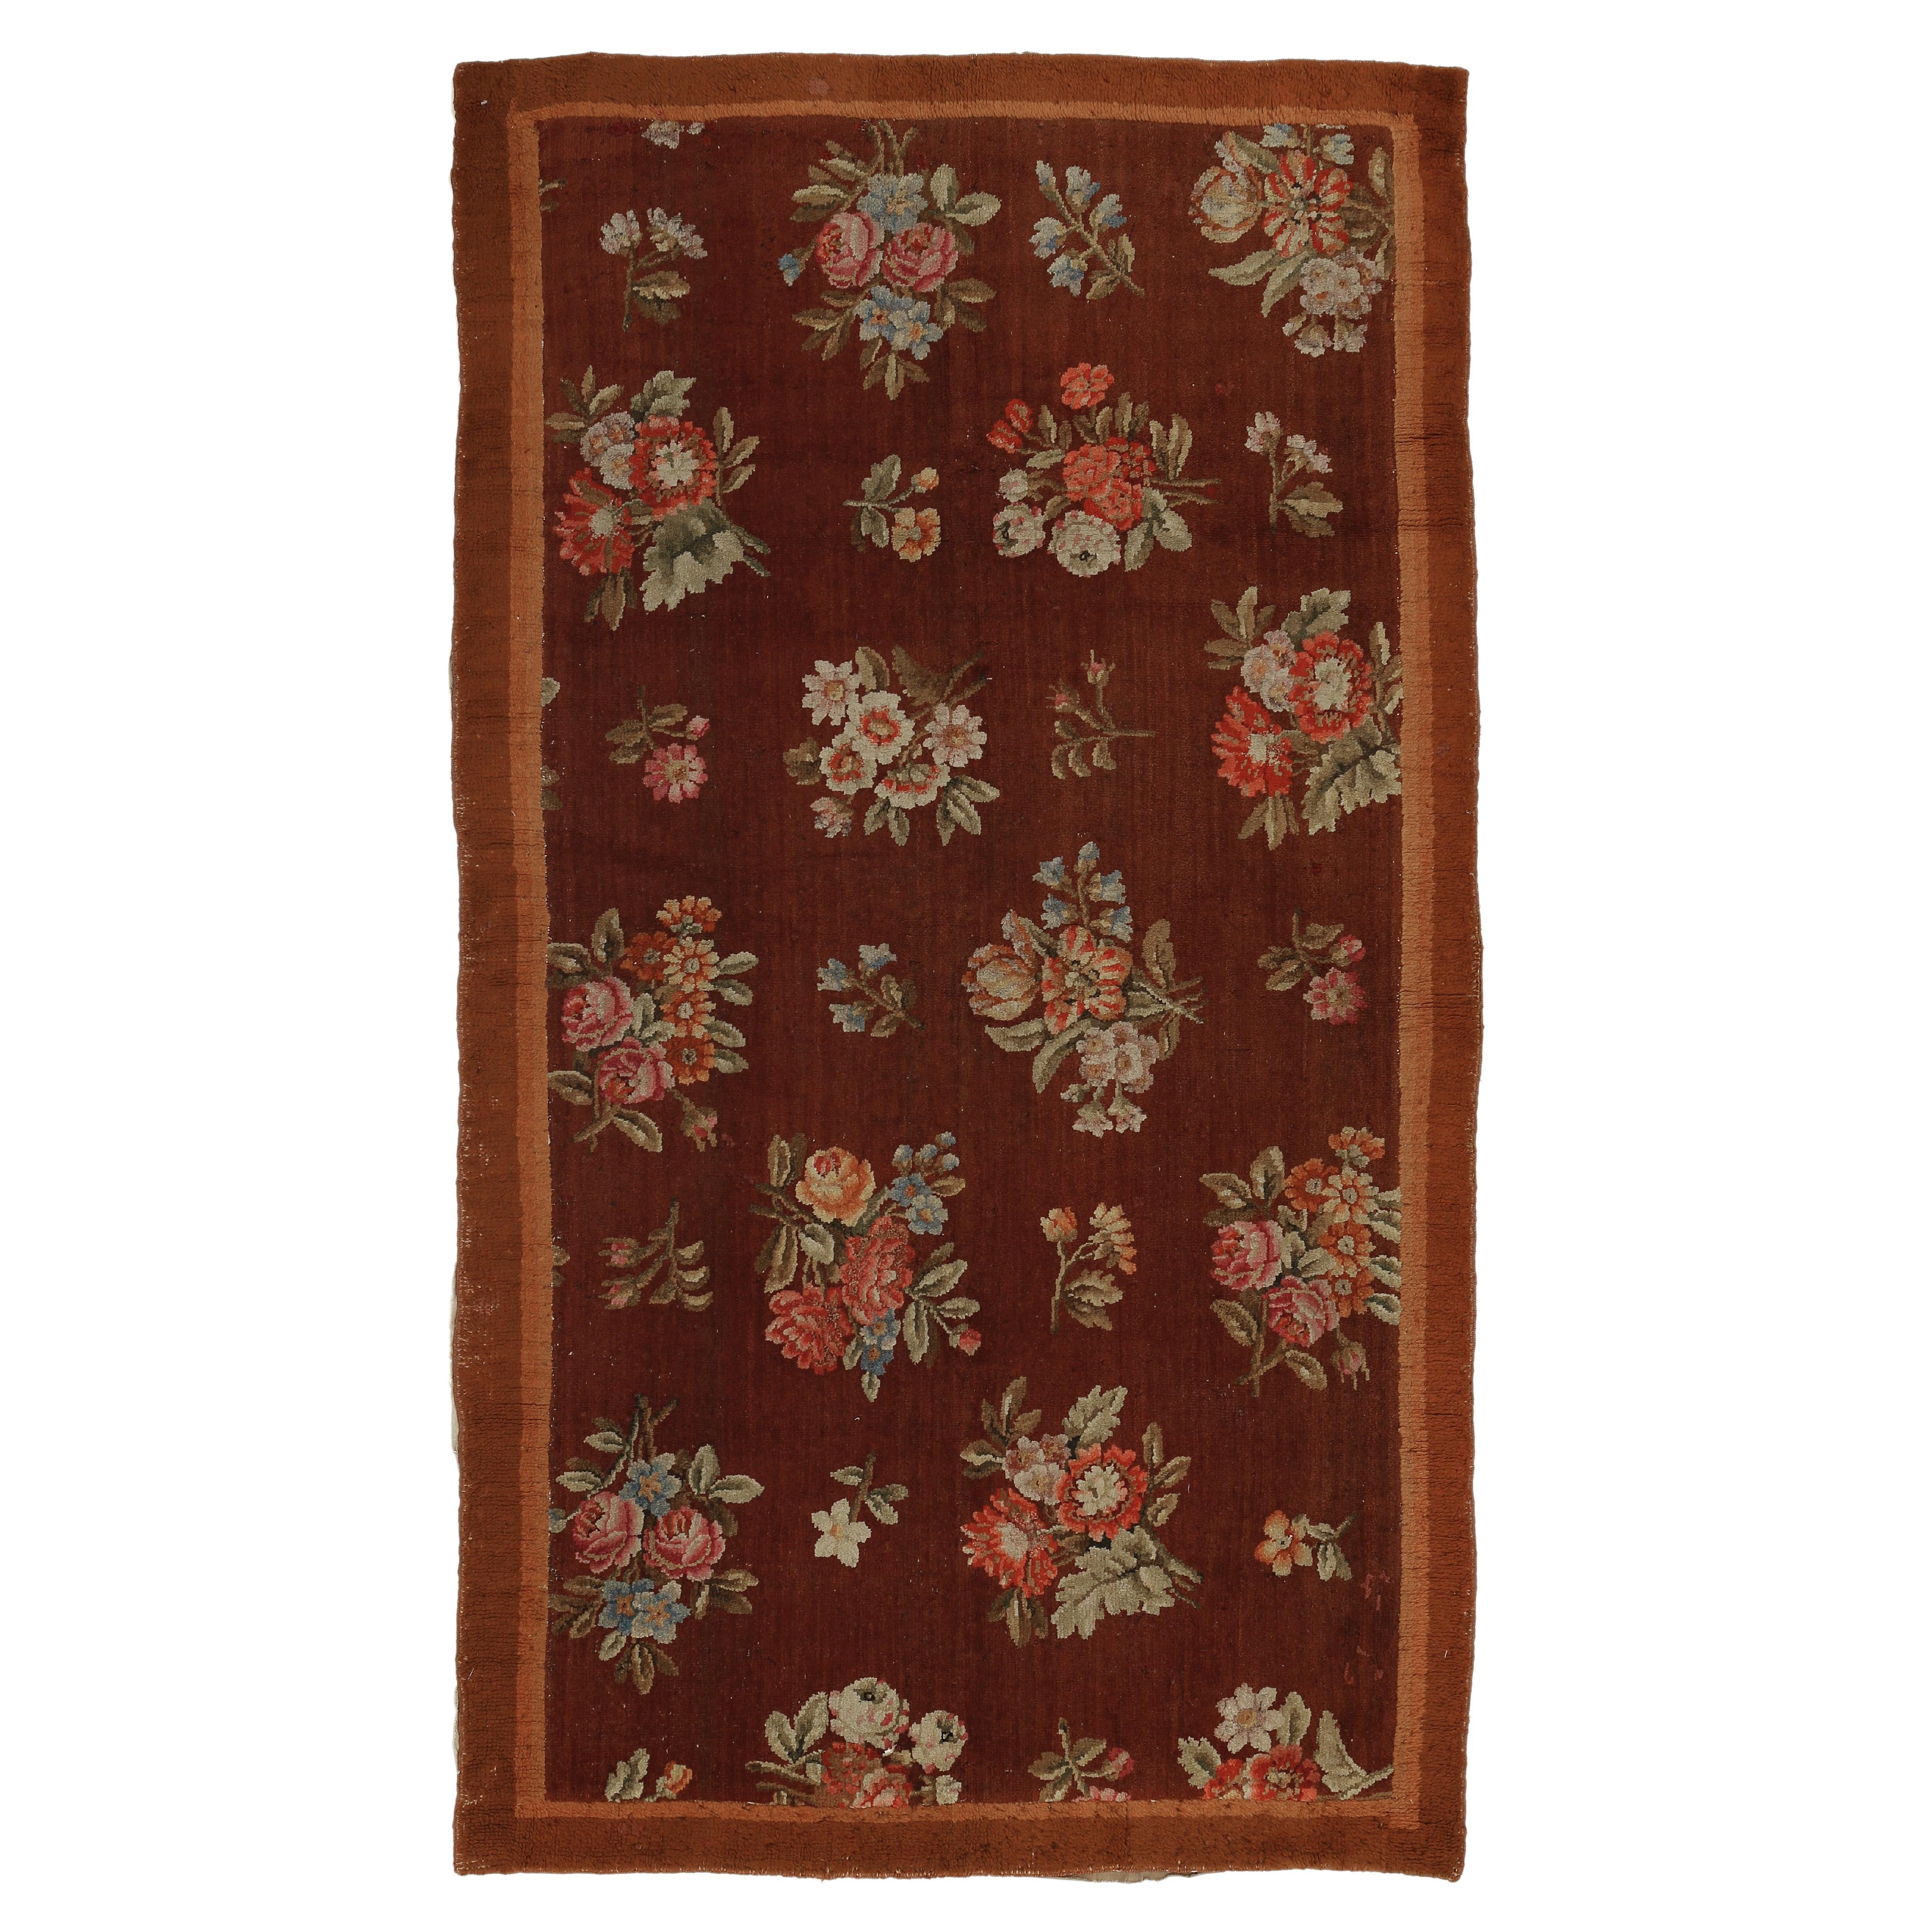 Antique French Charles X Savonnerie Rug with Botanical Design, Circa 1820